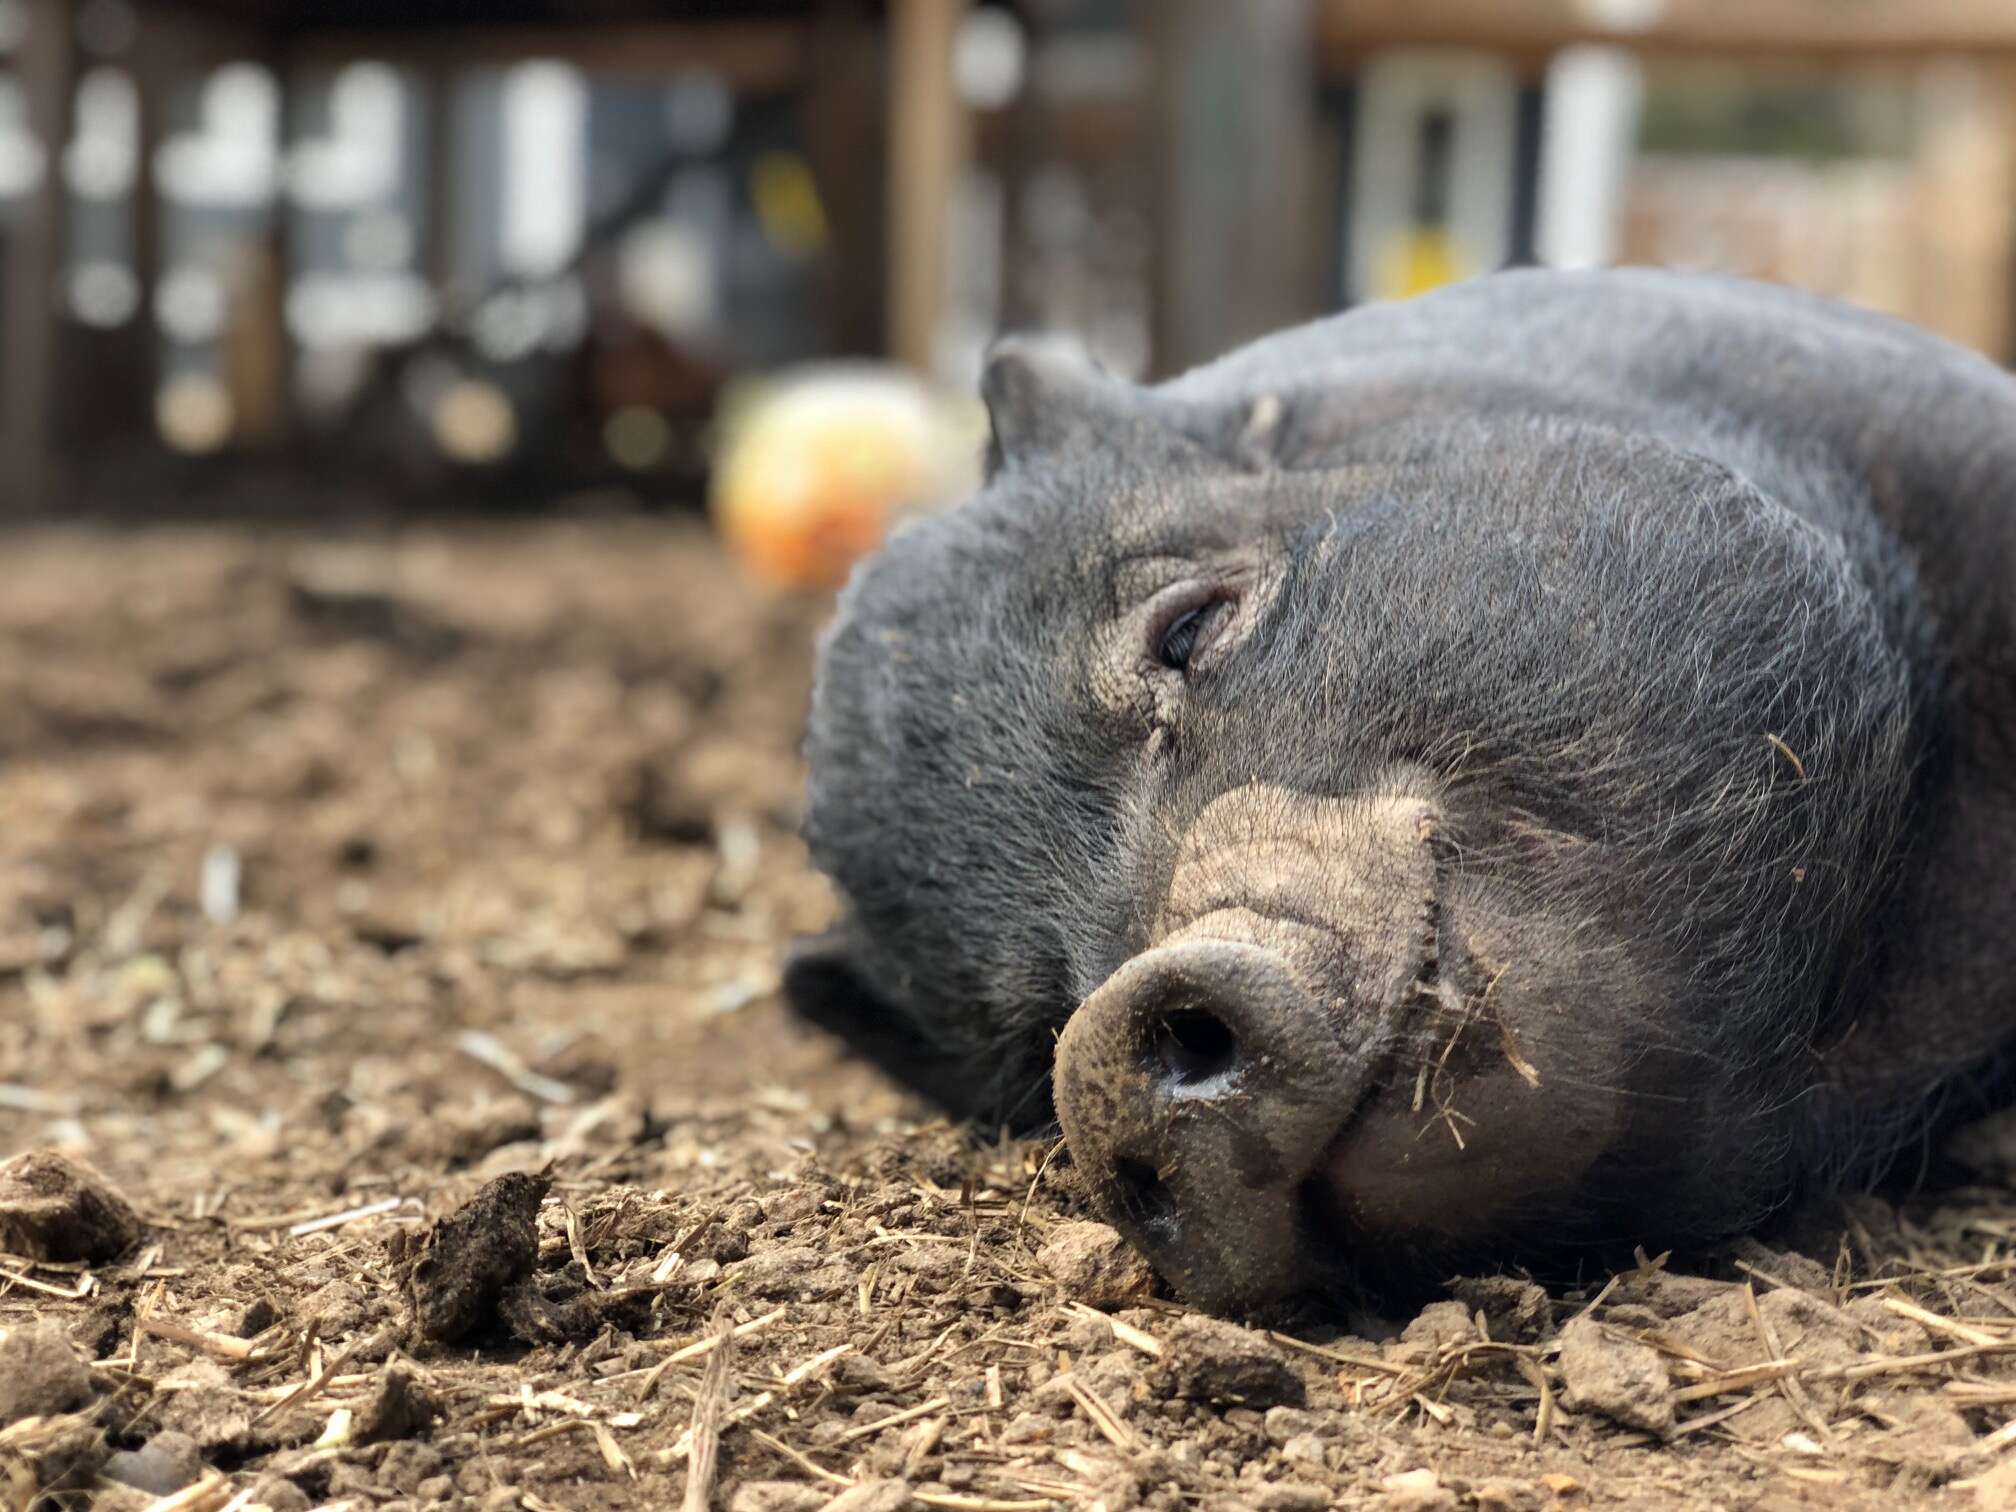 rescue pigs abandoned after they got too big